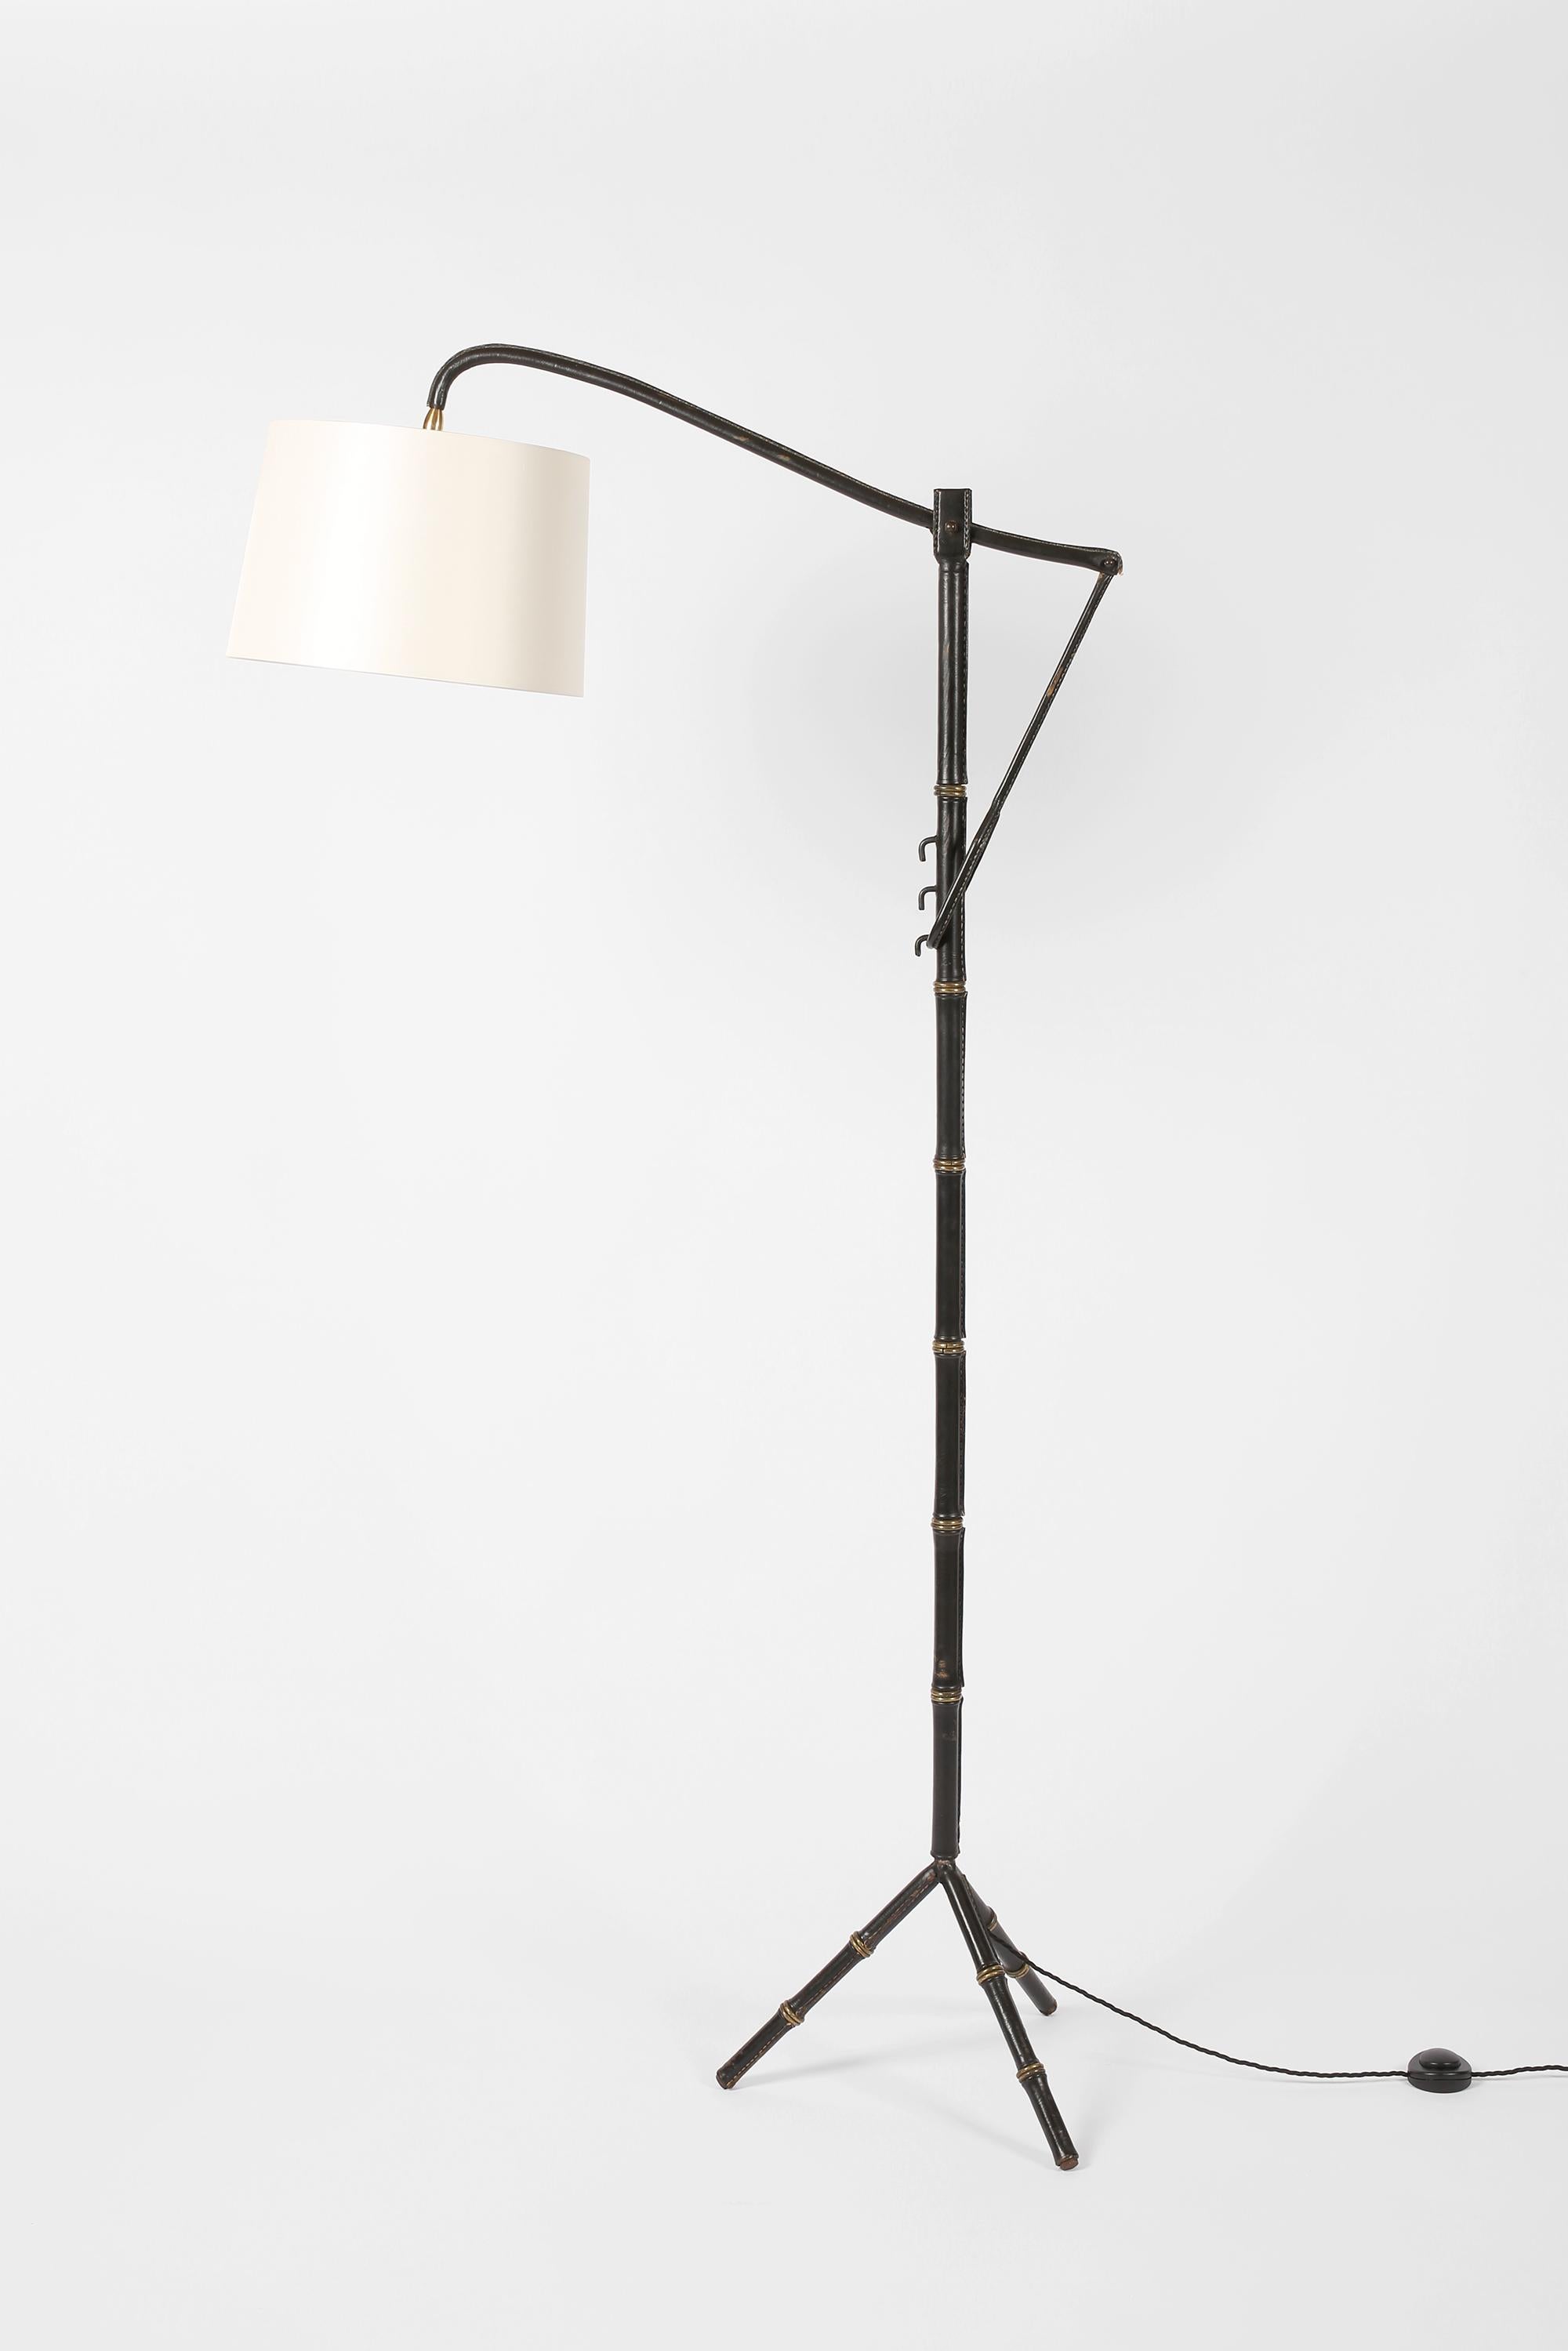 A rare black leather clad floor lamp by Jacques Adnet for Hermès, with gilt brass ring ‘bamboo’ detailing, contrast saddle stitching and unique ‘crémaillère’ height adjustment system. French, c. 1950.

Supplied with an off-white dupion silk shade